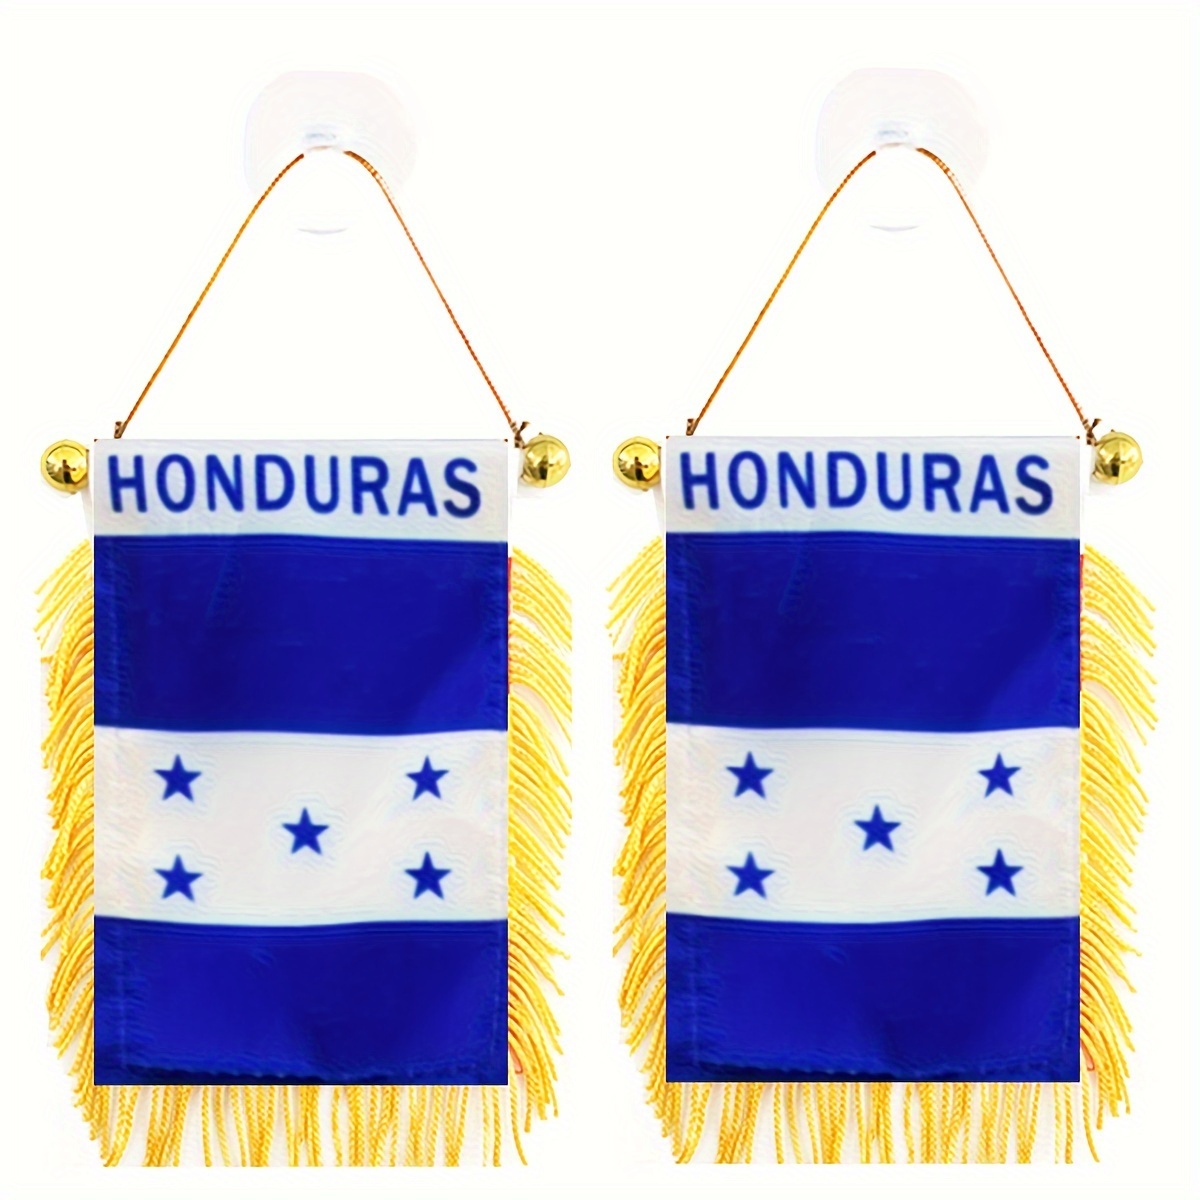 

2pcs, Honduras Window Hanging 3x4inch 8x12cm Hnd Hn Honduras Double Side Mini Flag Banner Car Rearview Mirror Decor Fringed Hanging Flag With Suction Cup